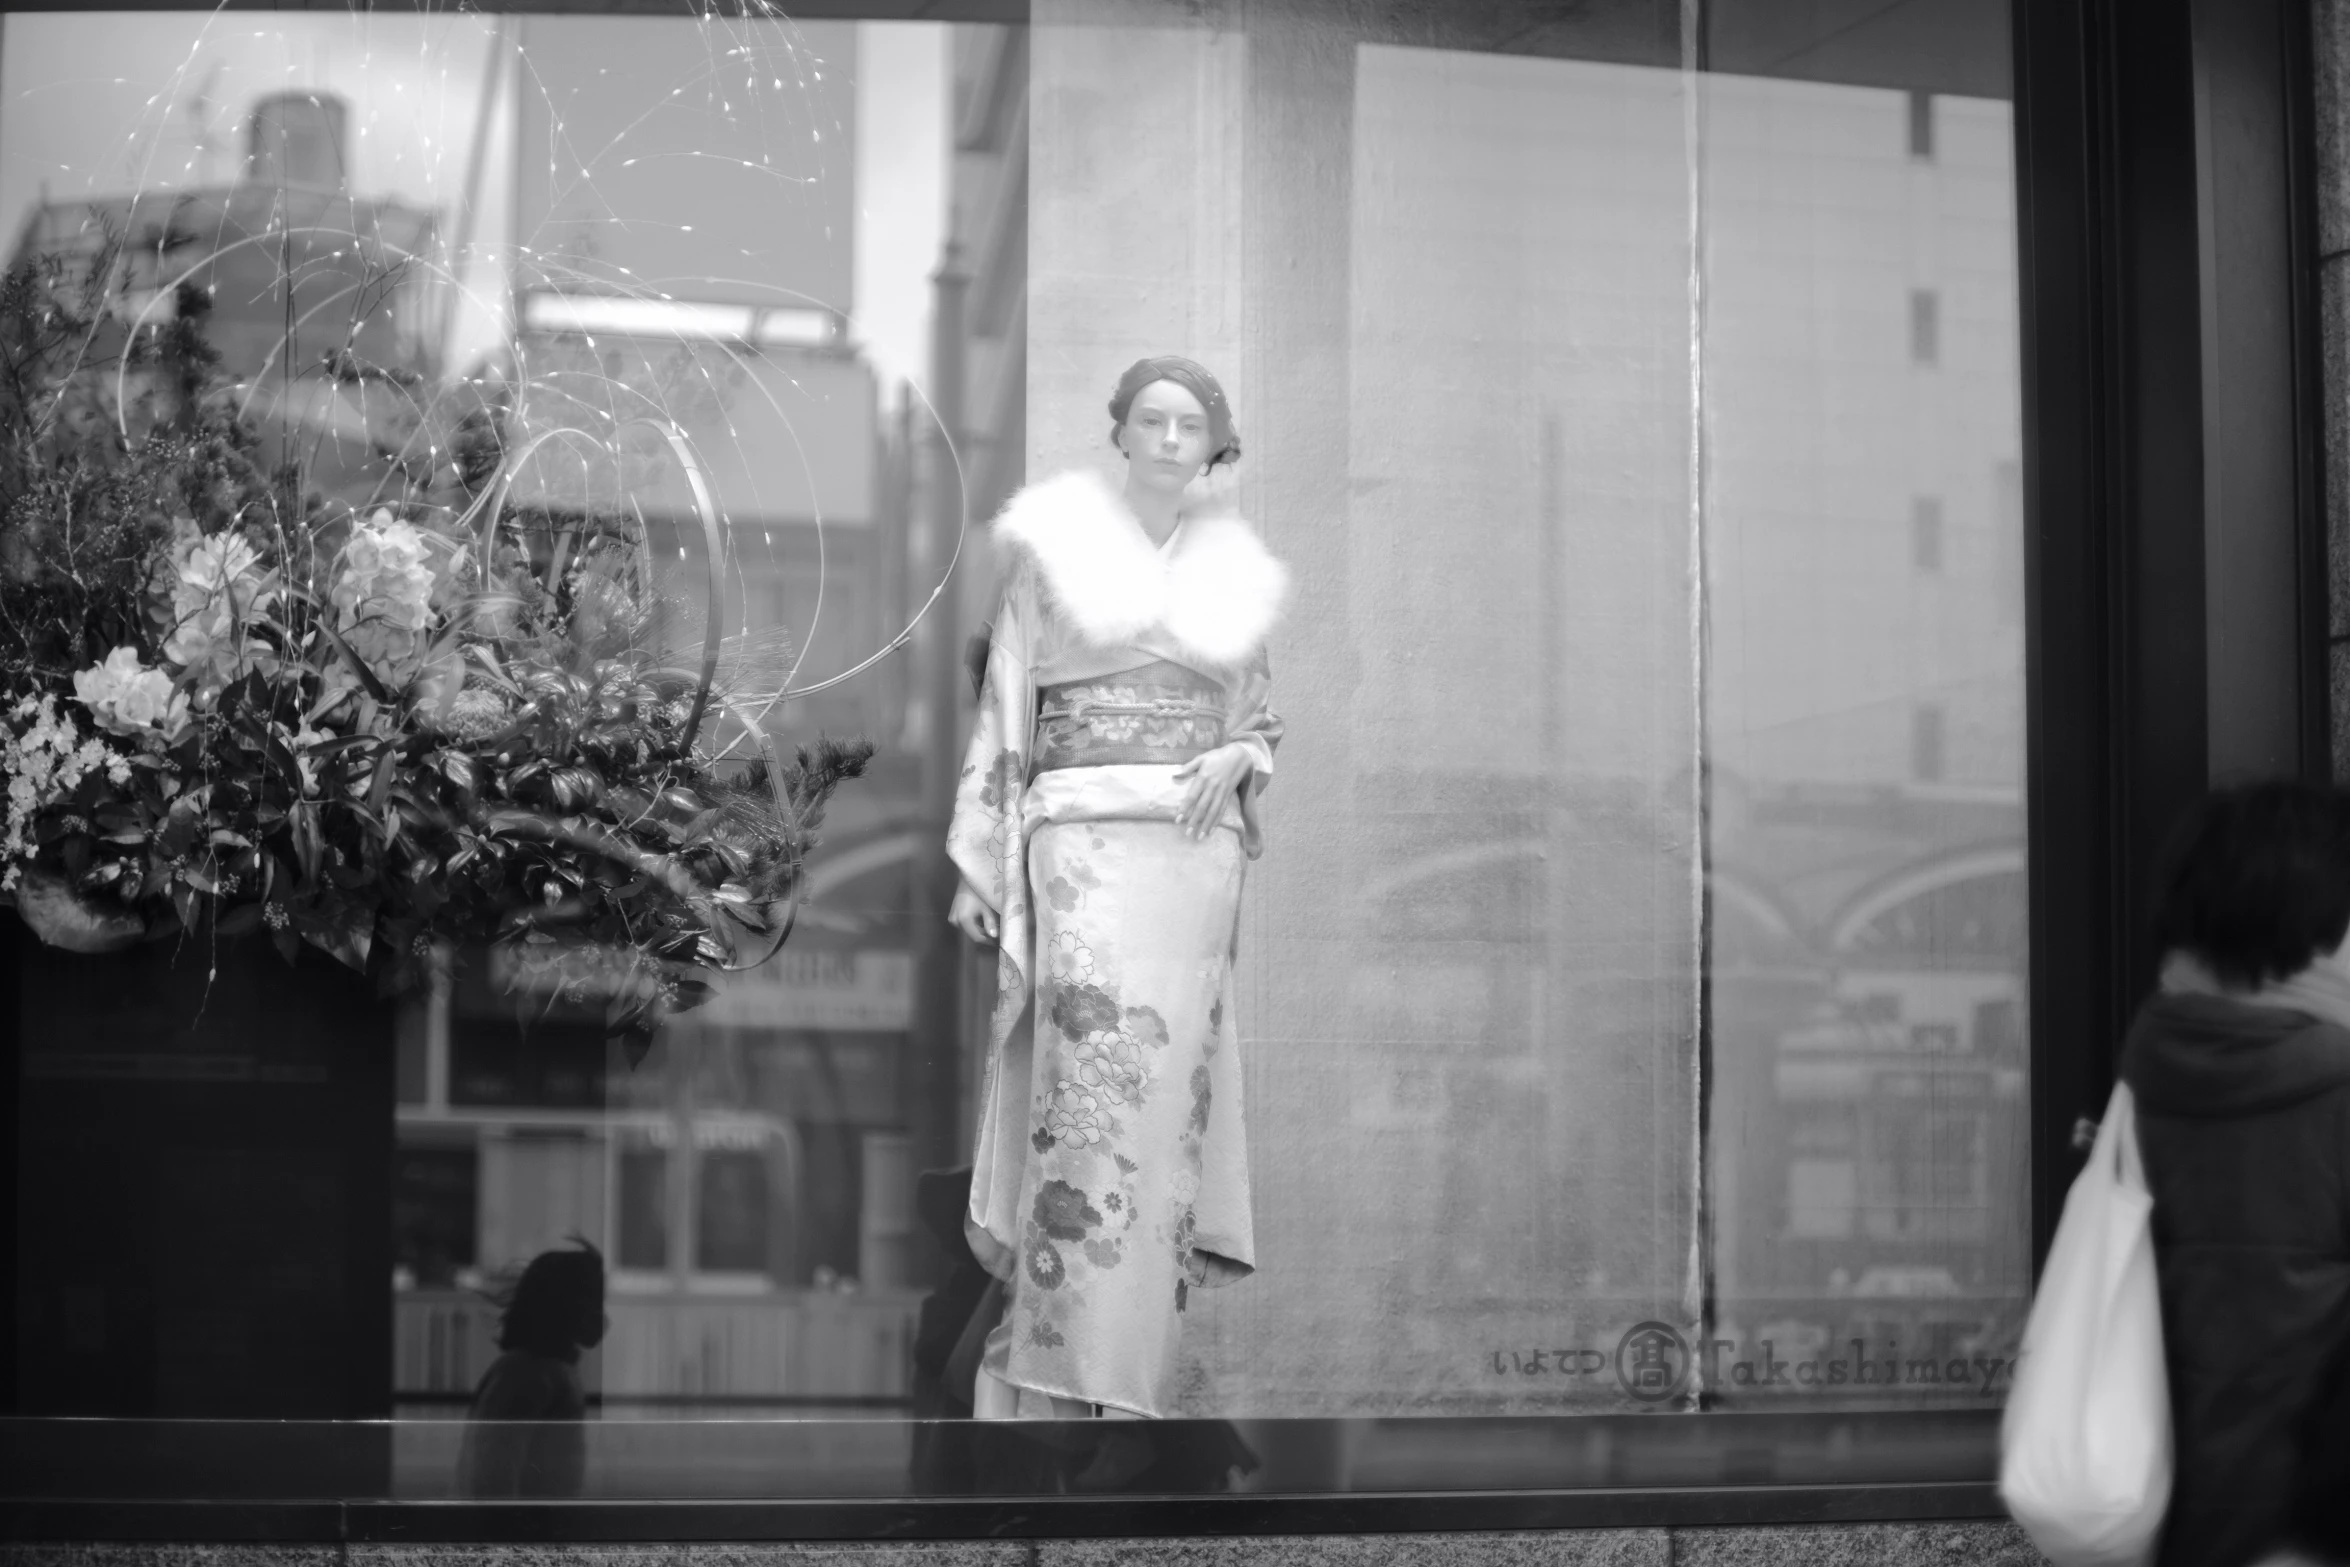 a woman stands behind the display glass of a store window